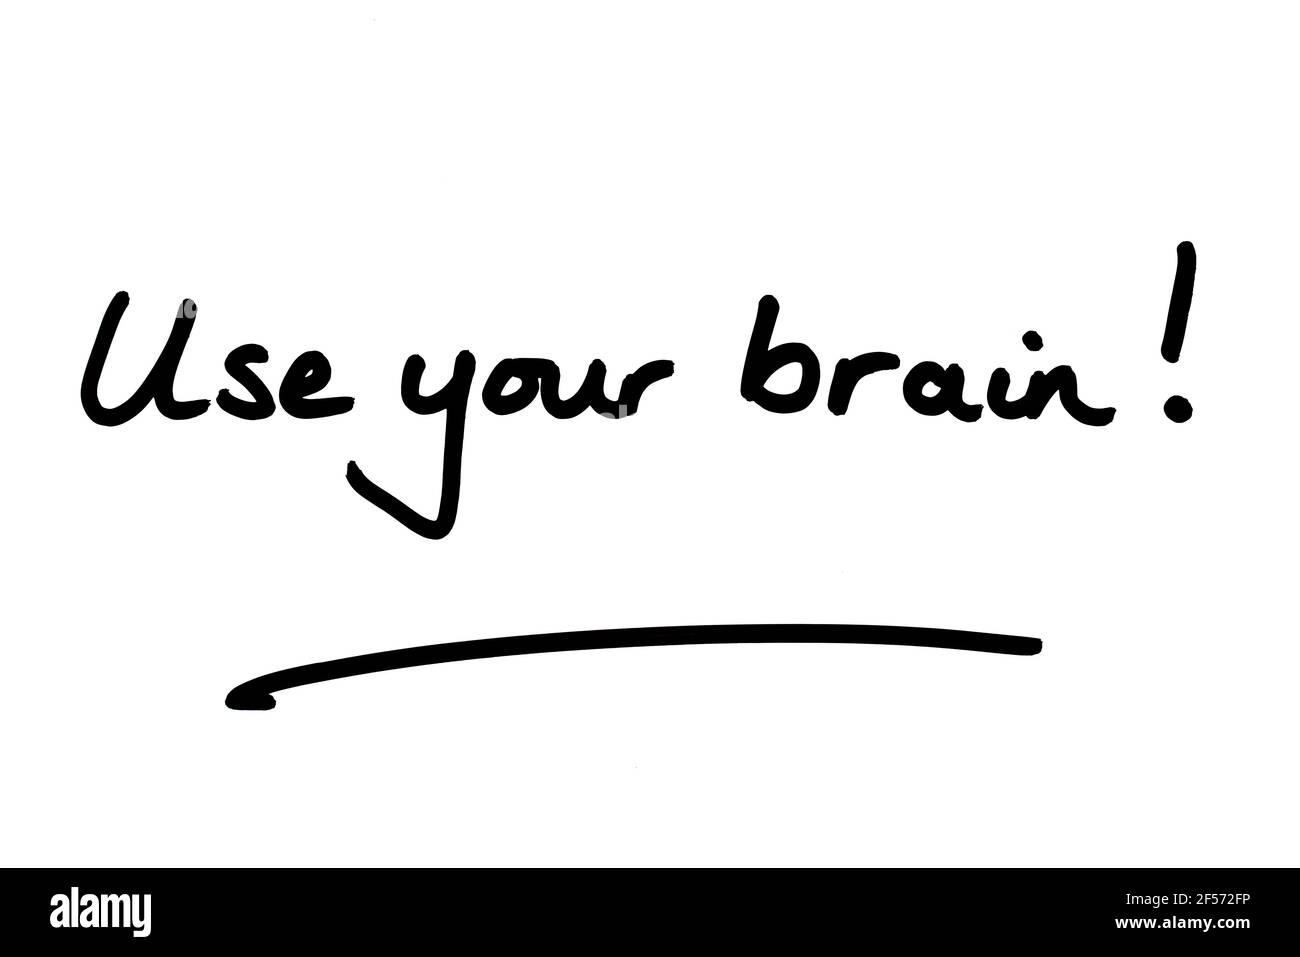 Use your brain! handwritten on a white background. Stock Photo